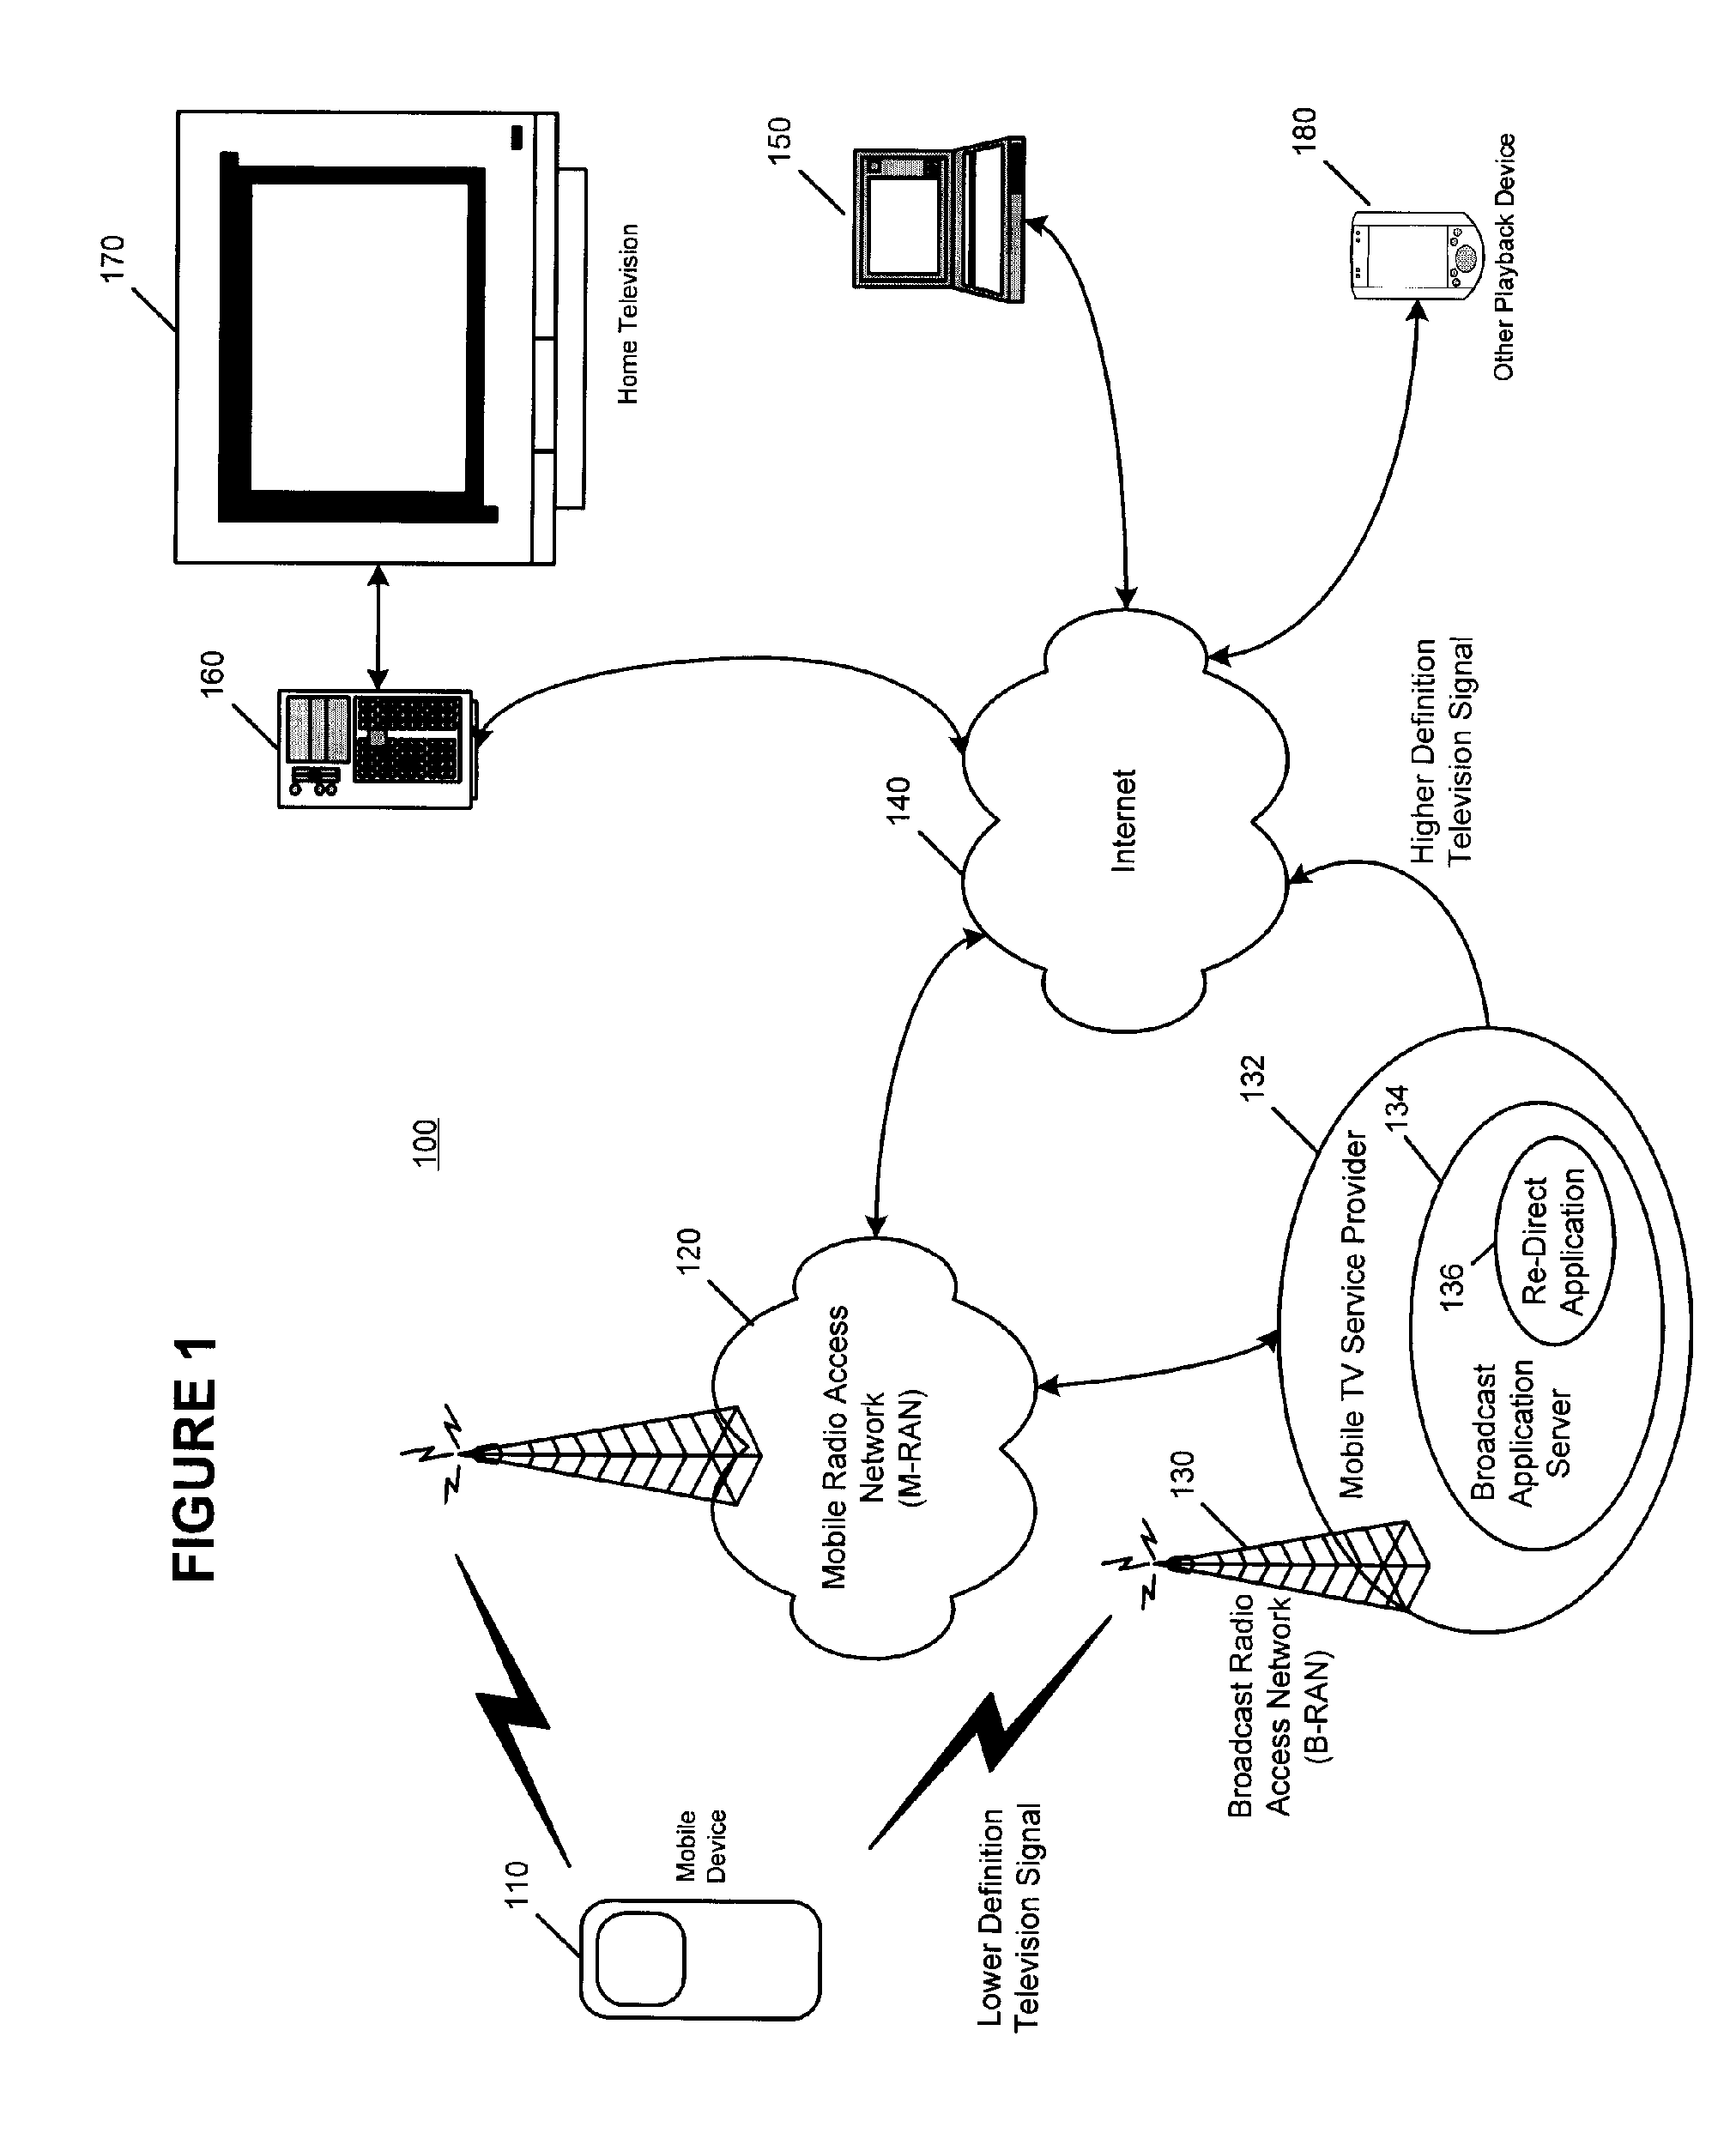 Mobile device control of mobile television broadcast signals to alternate destinations